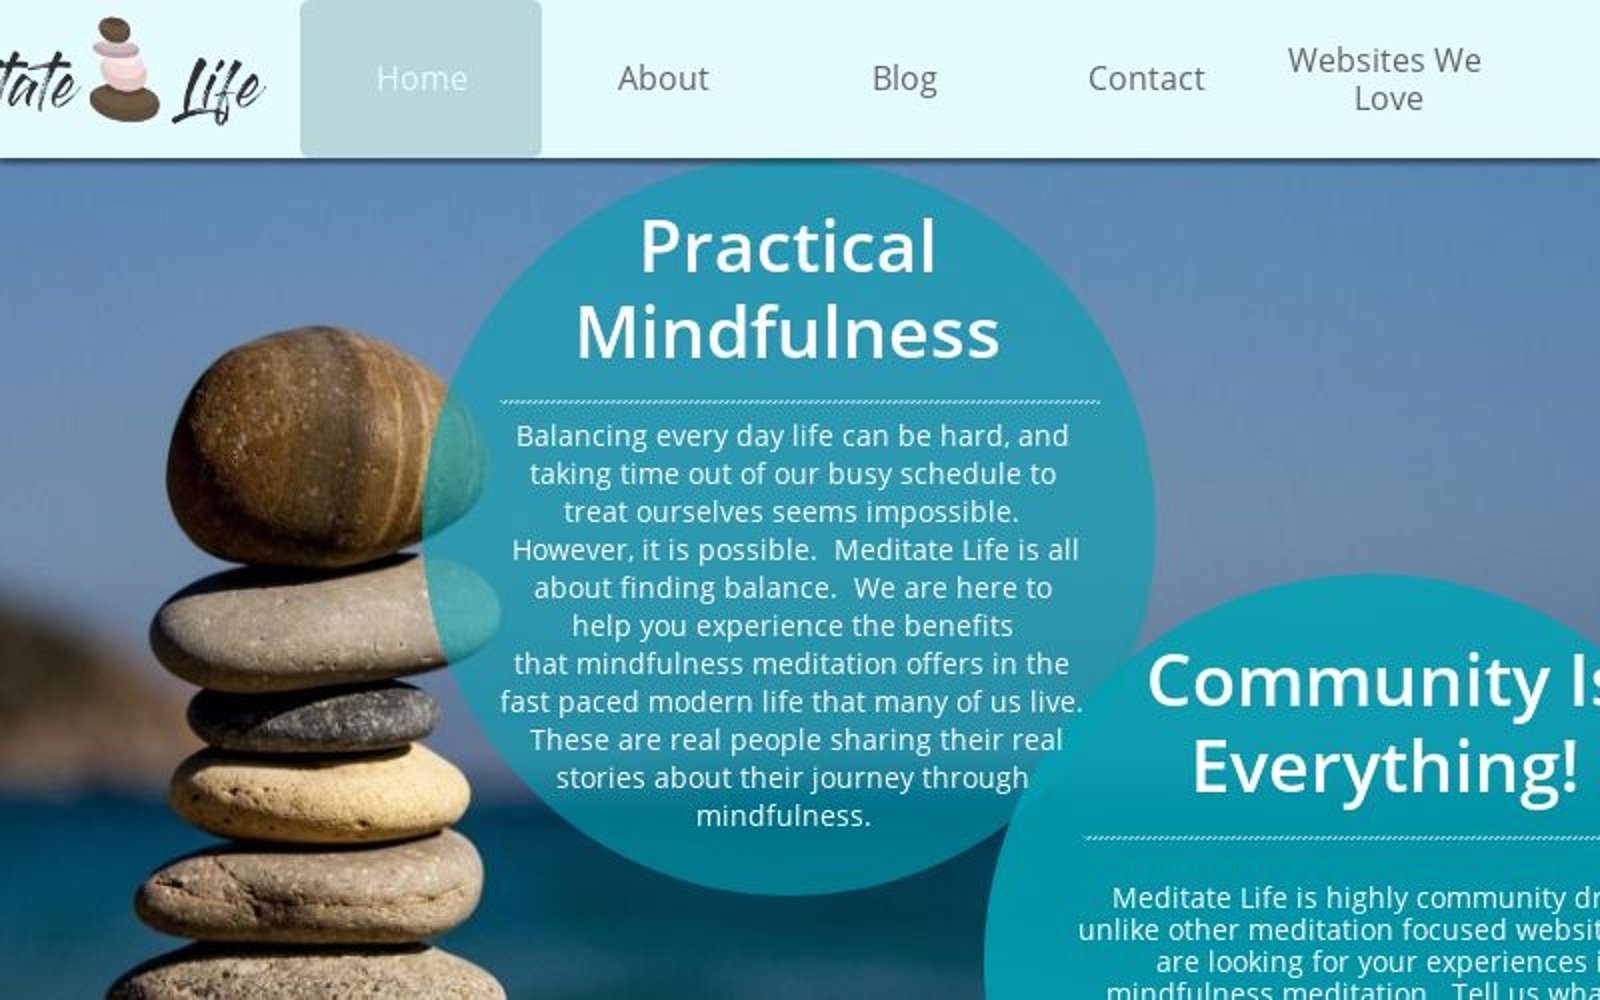 Home - Practical Mindfulness